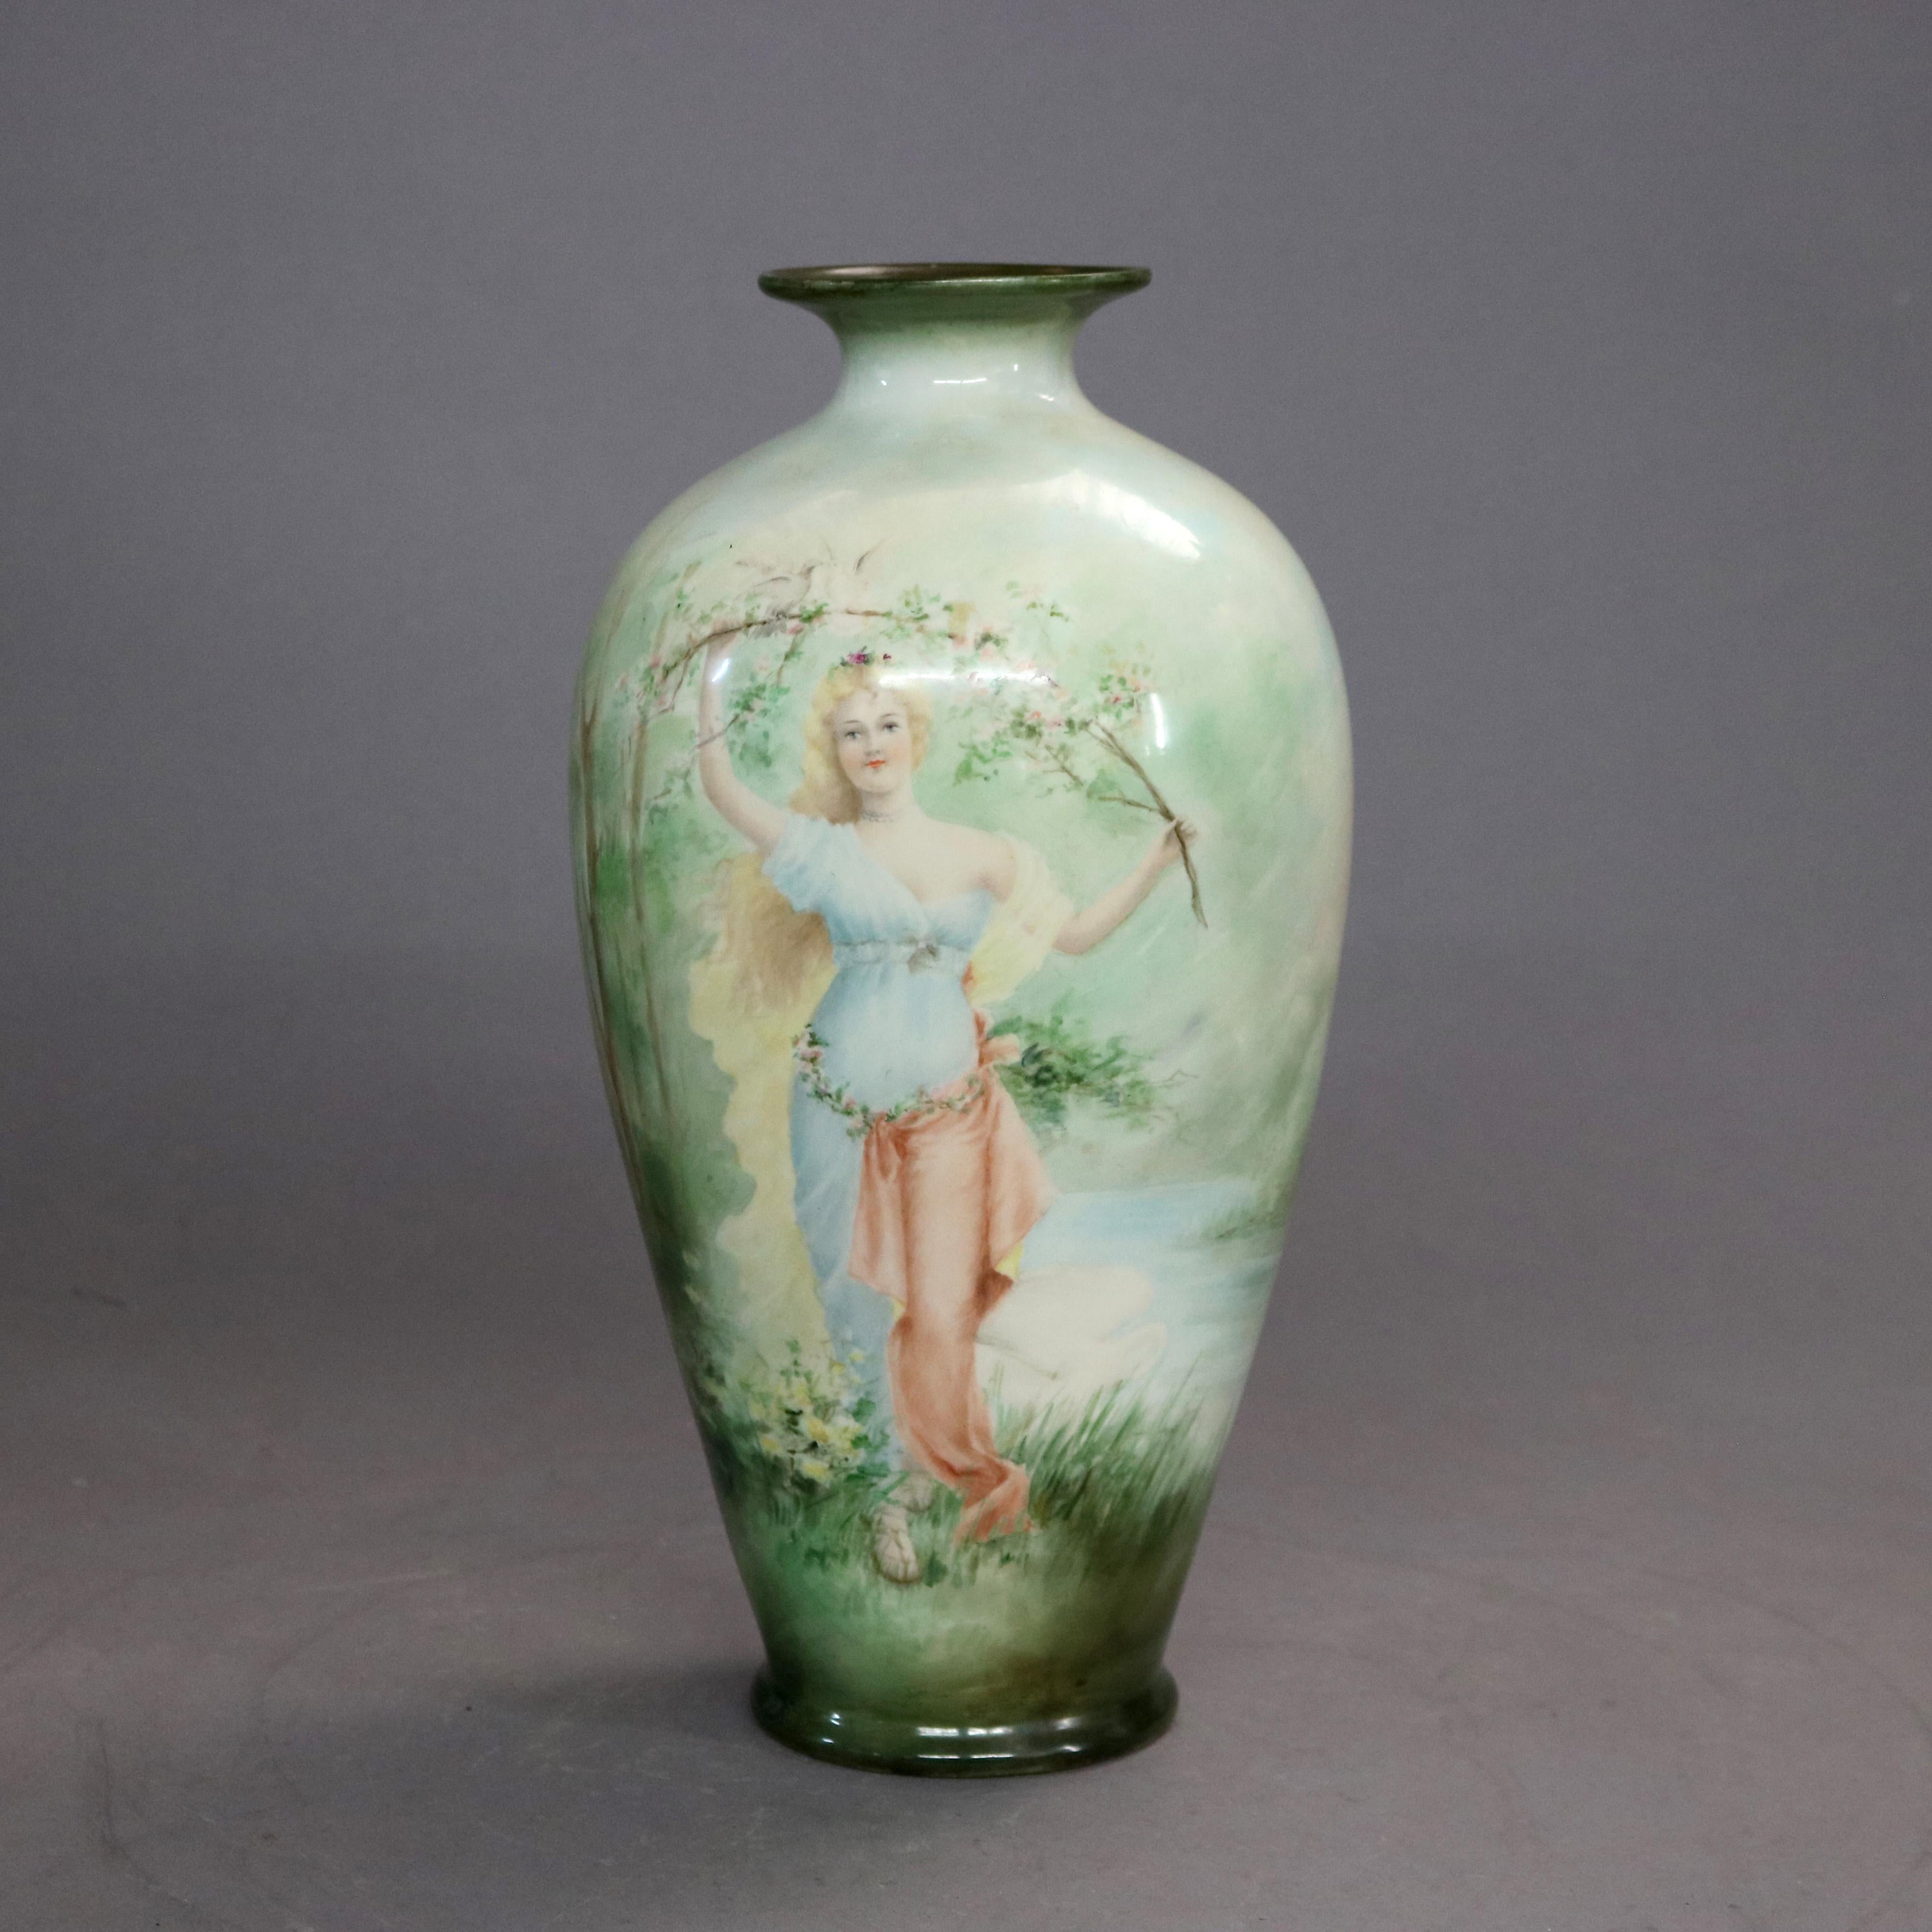 An antique Irish Belleek vase offers porcelain construction with portrait of a woman in outdoor setting, maker mark on base as photographed, circa 1890

Measures - 14.75